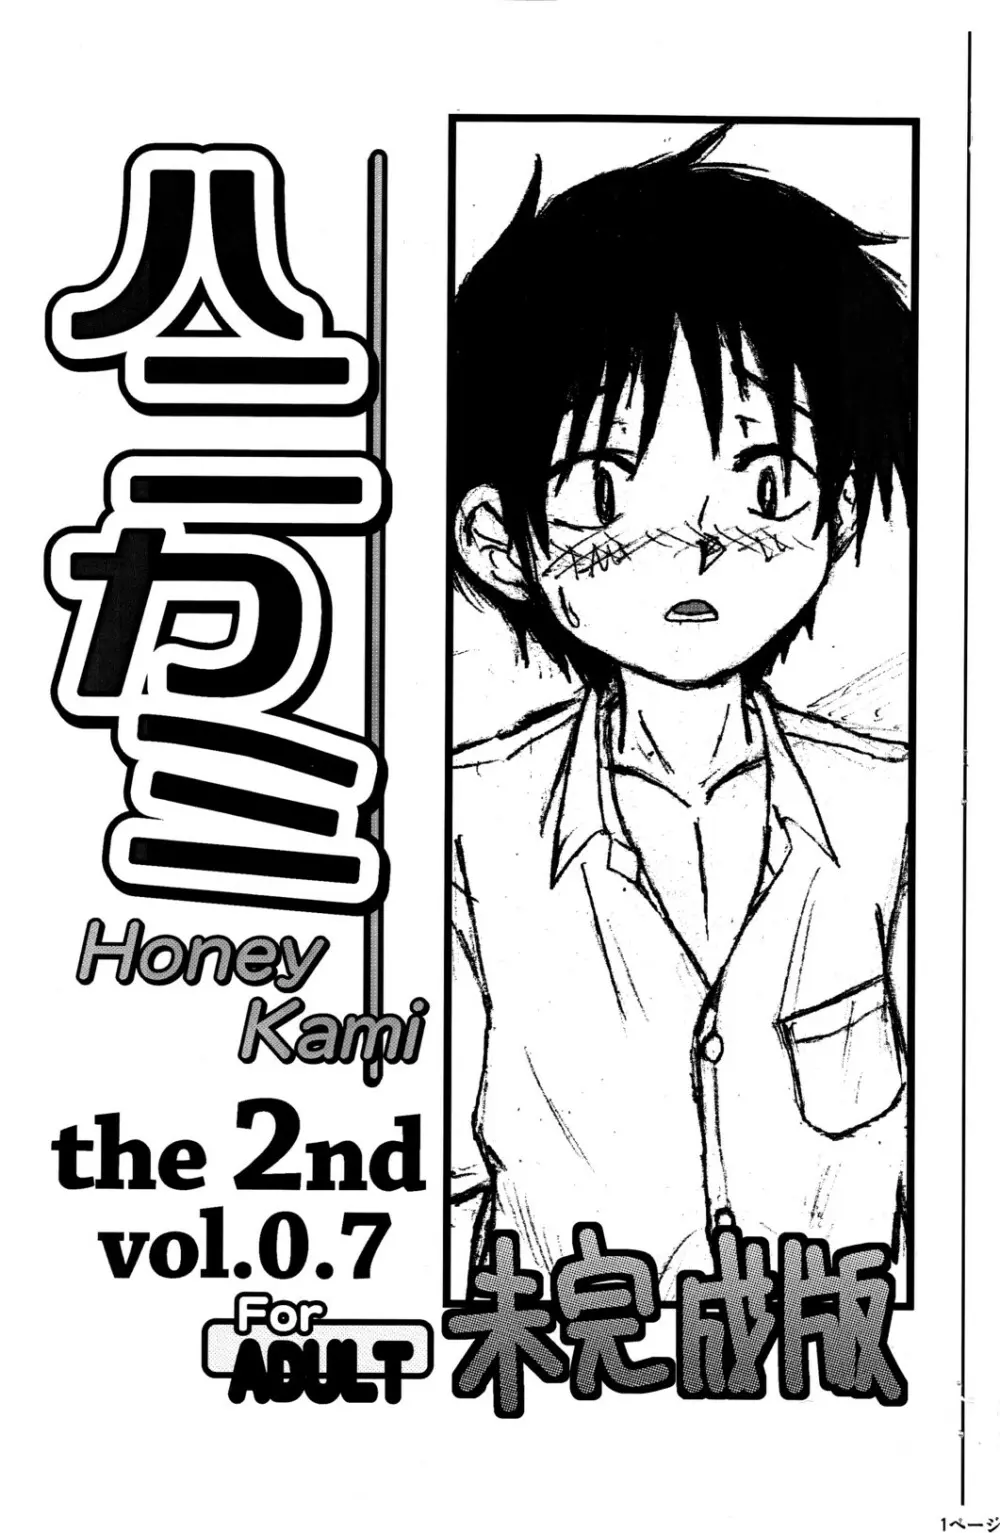 Crow (Theory of Heaven) - Honey Kami the 2nd vol.0.7 - page1